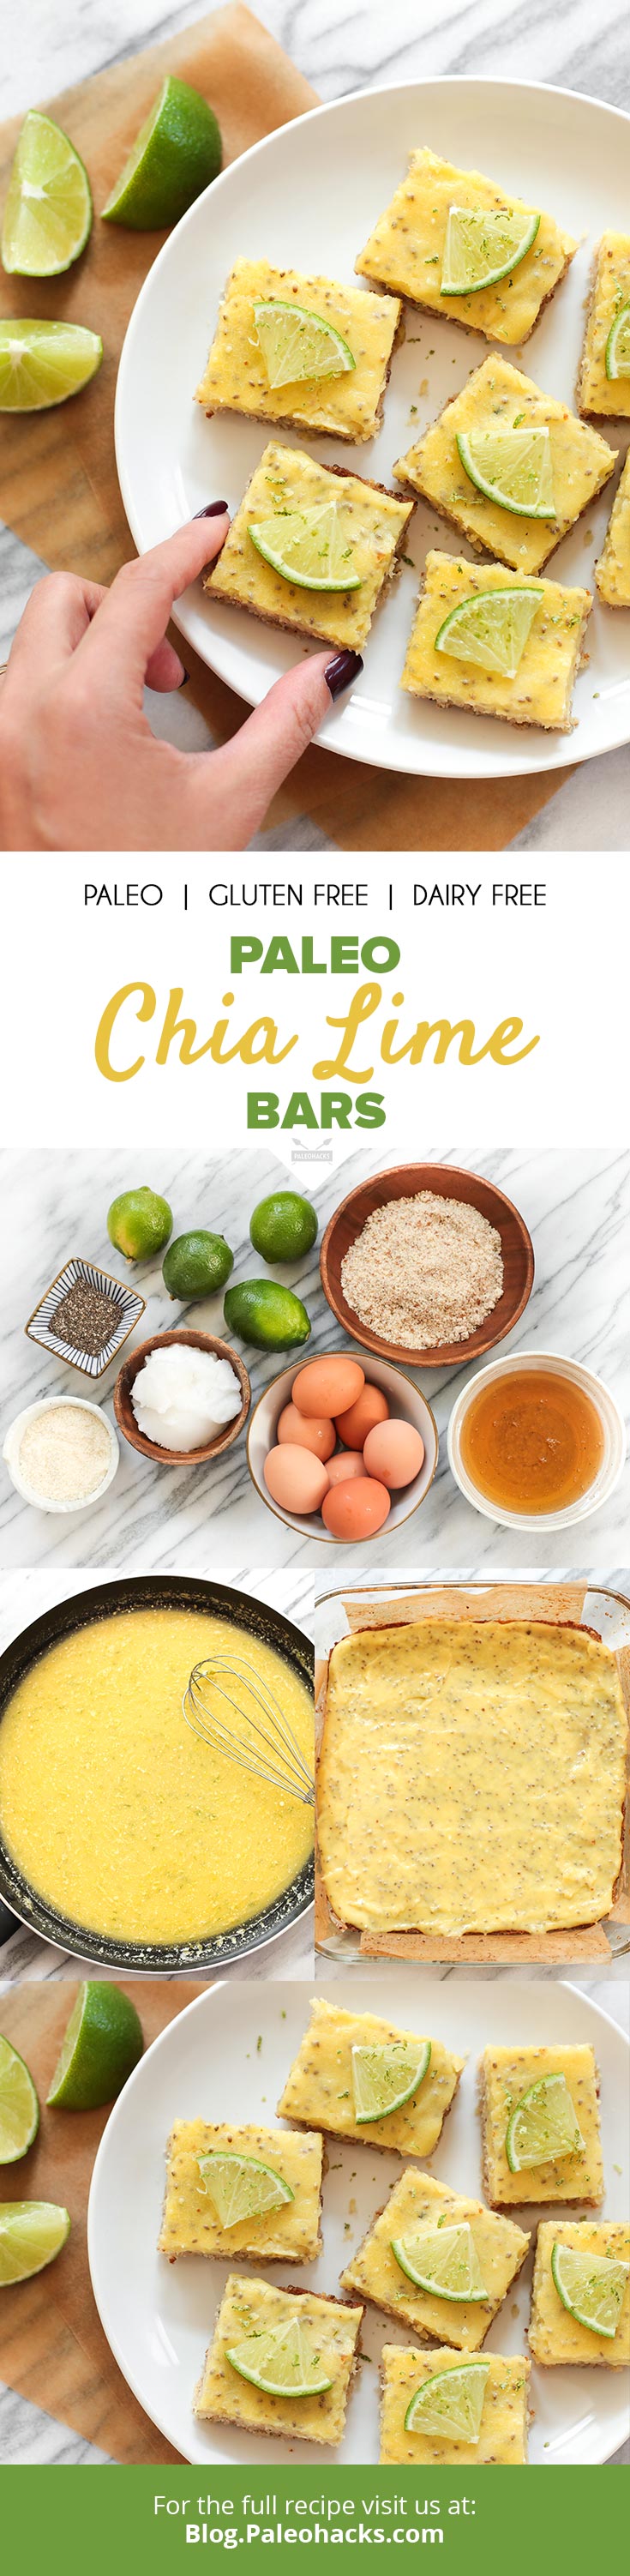 Serve up these bite-sized Chia Lime Bars for a refreshing, healthier-for-you dessert. Tropical and sweet, this dessert is going to be your new summertime favorite.